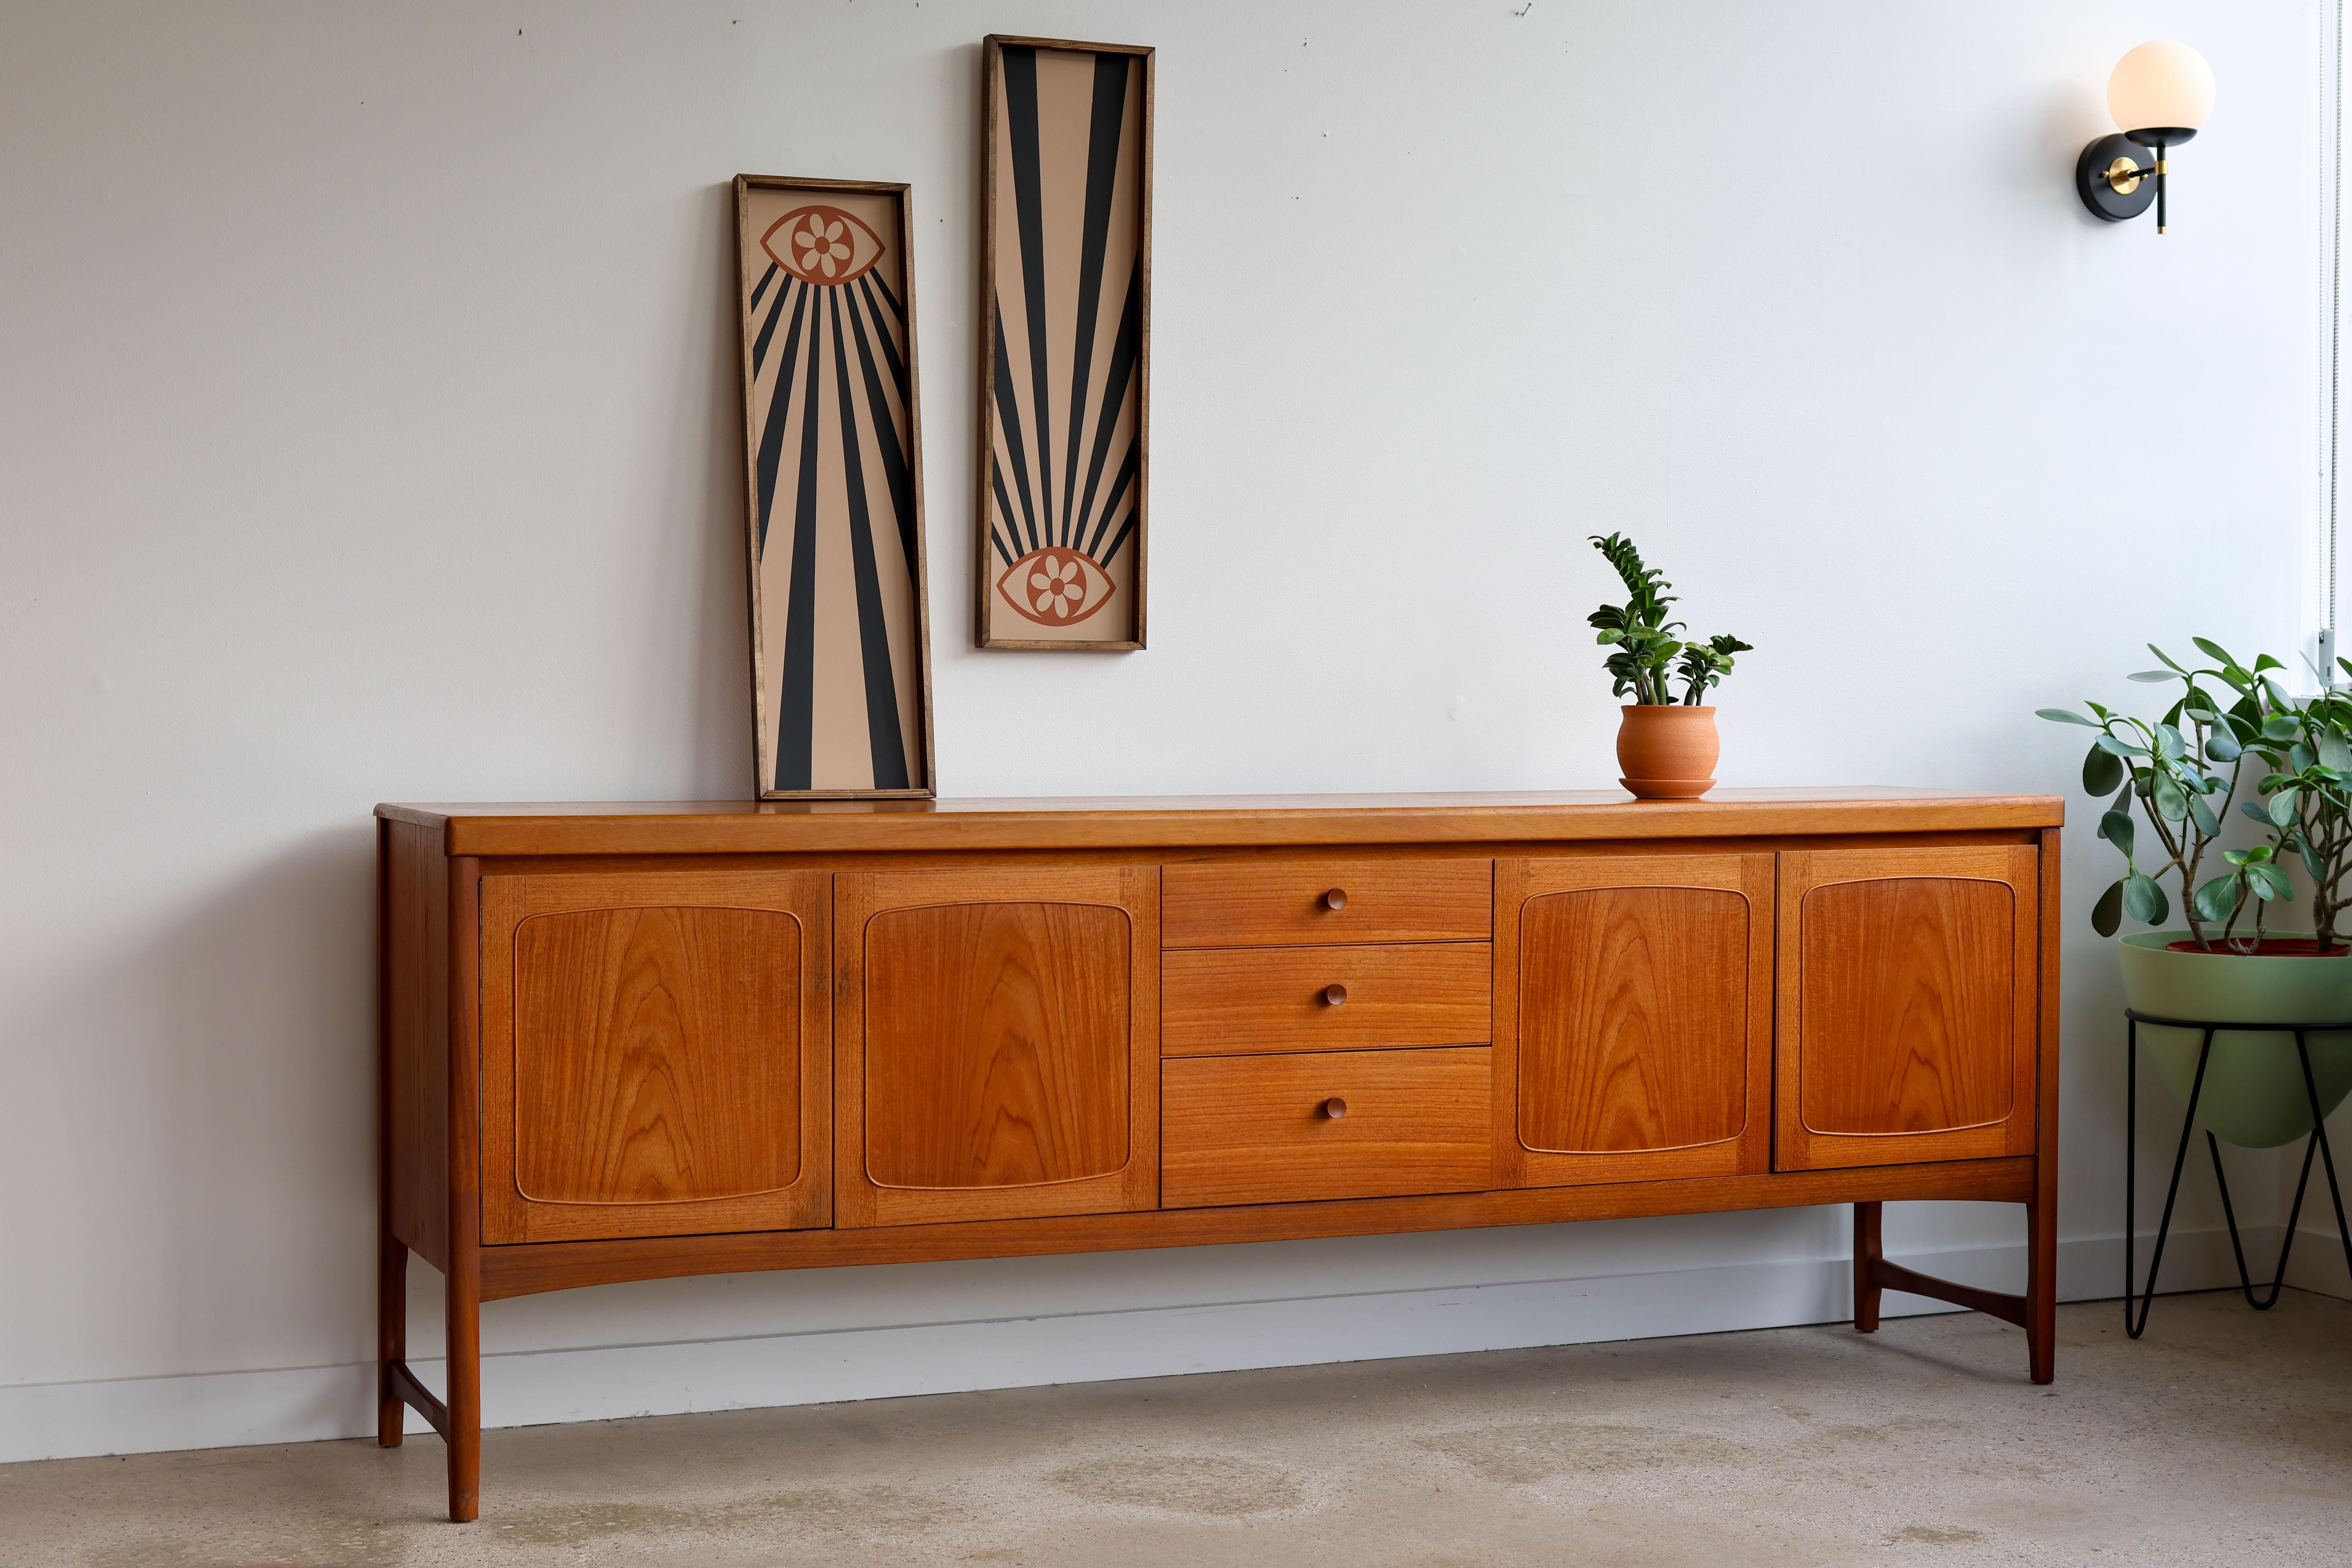 Mid-Century Modern teakwood credenza.
Teak sideboard by Nathan Furniture, UK, 1960s. 
Symmetrical sideboard with two sets of double cabinets and shelves.
Three dovetailed drawers; top drawer holds dividers.
Excellent vintage condition.

84” long x